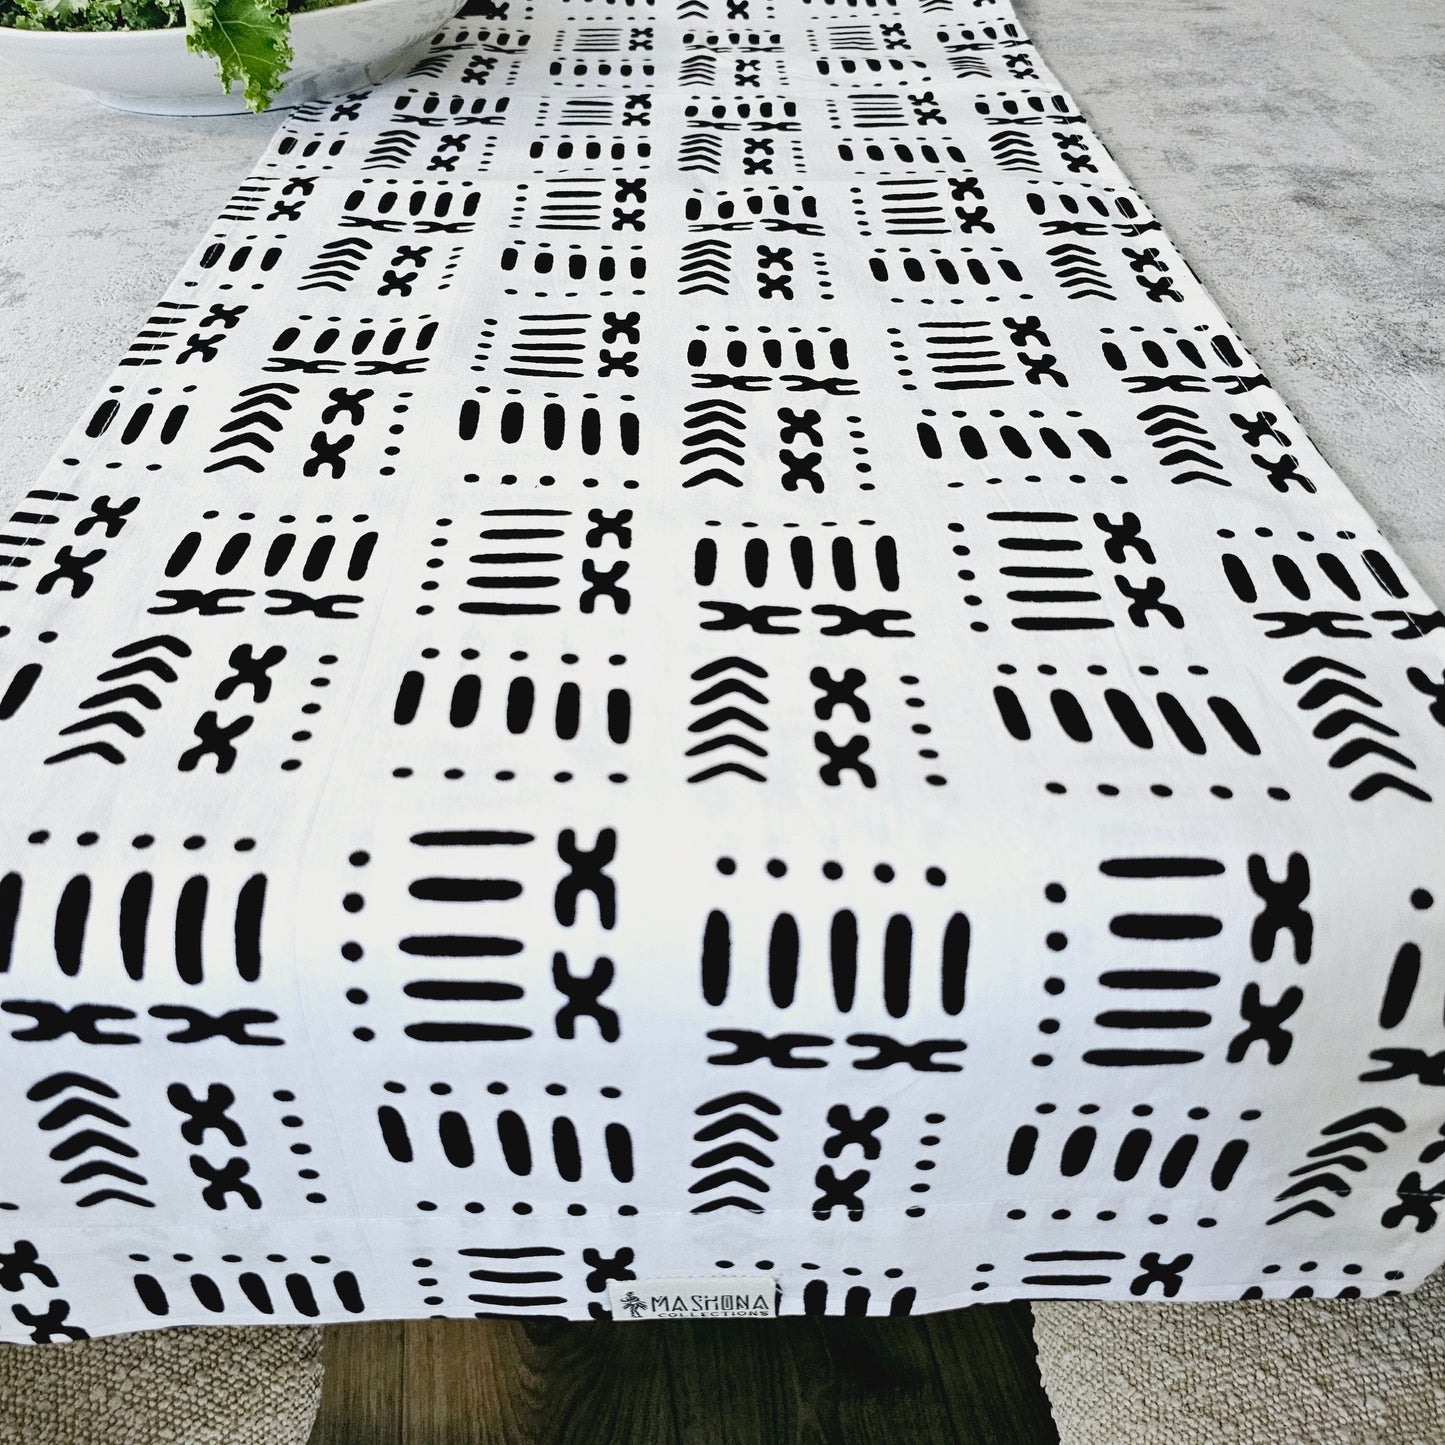 Copy of Handmade African Print "Mudcloth" Bogolan Inspired Print Table Runner Made from 100% African Print Fabric